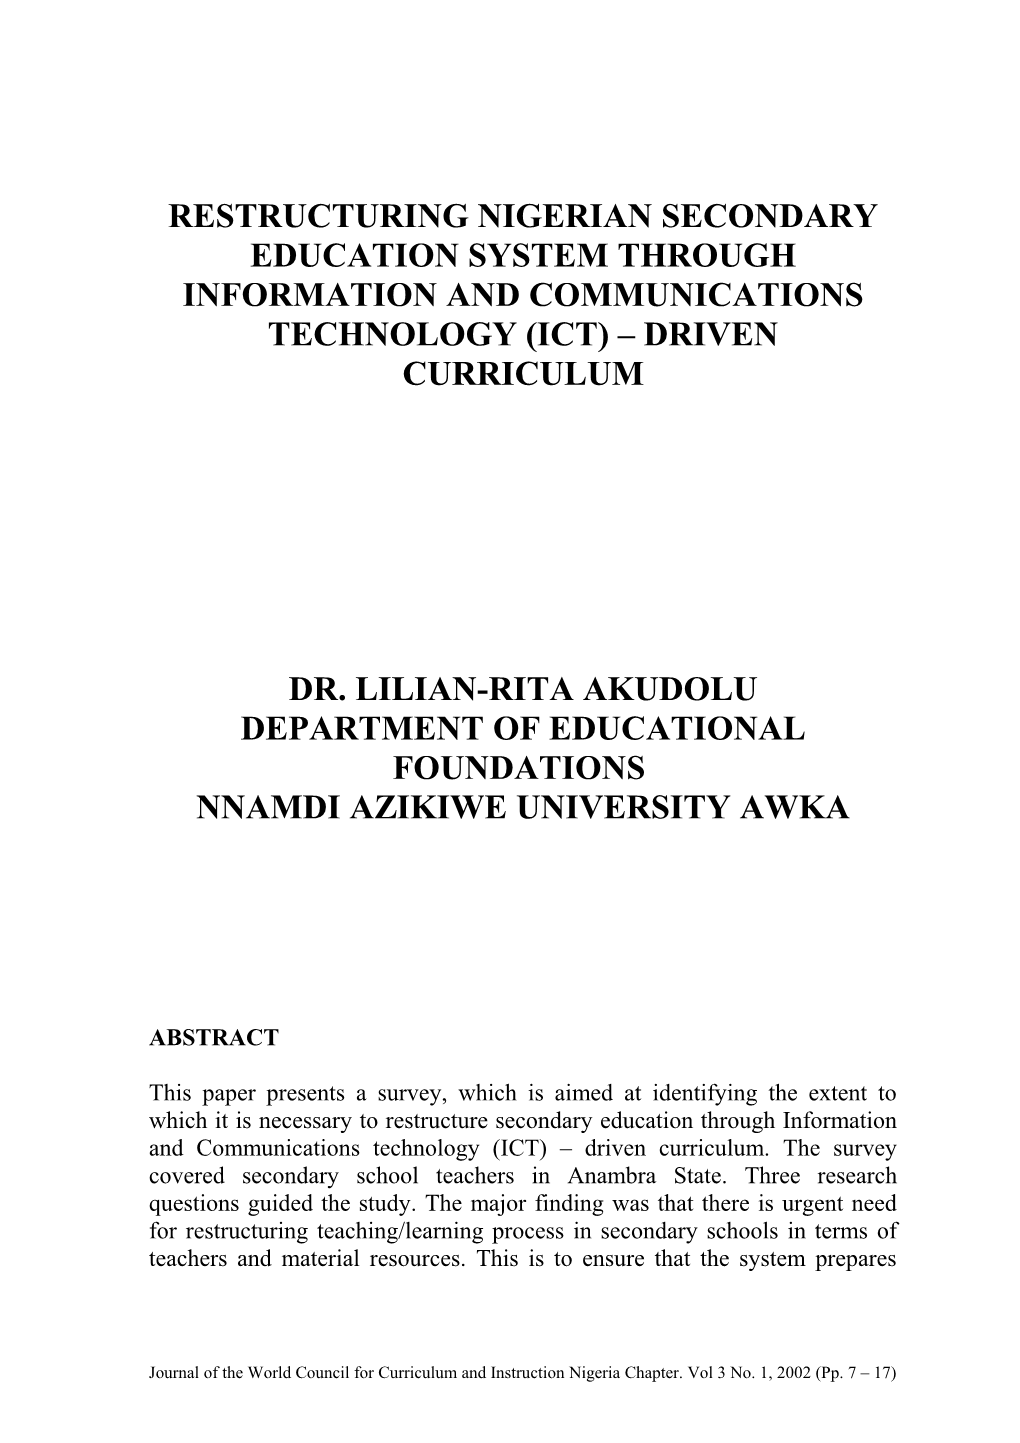 Restructuring Nigerian Secondary Education System Through Information And Communications Technology (Ict) – Driven Curriculum